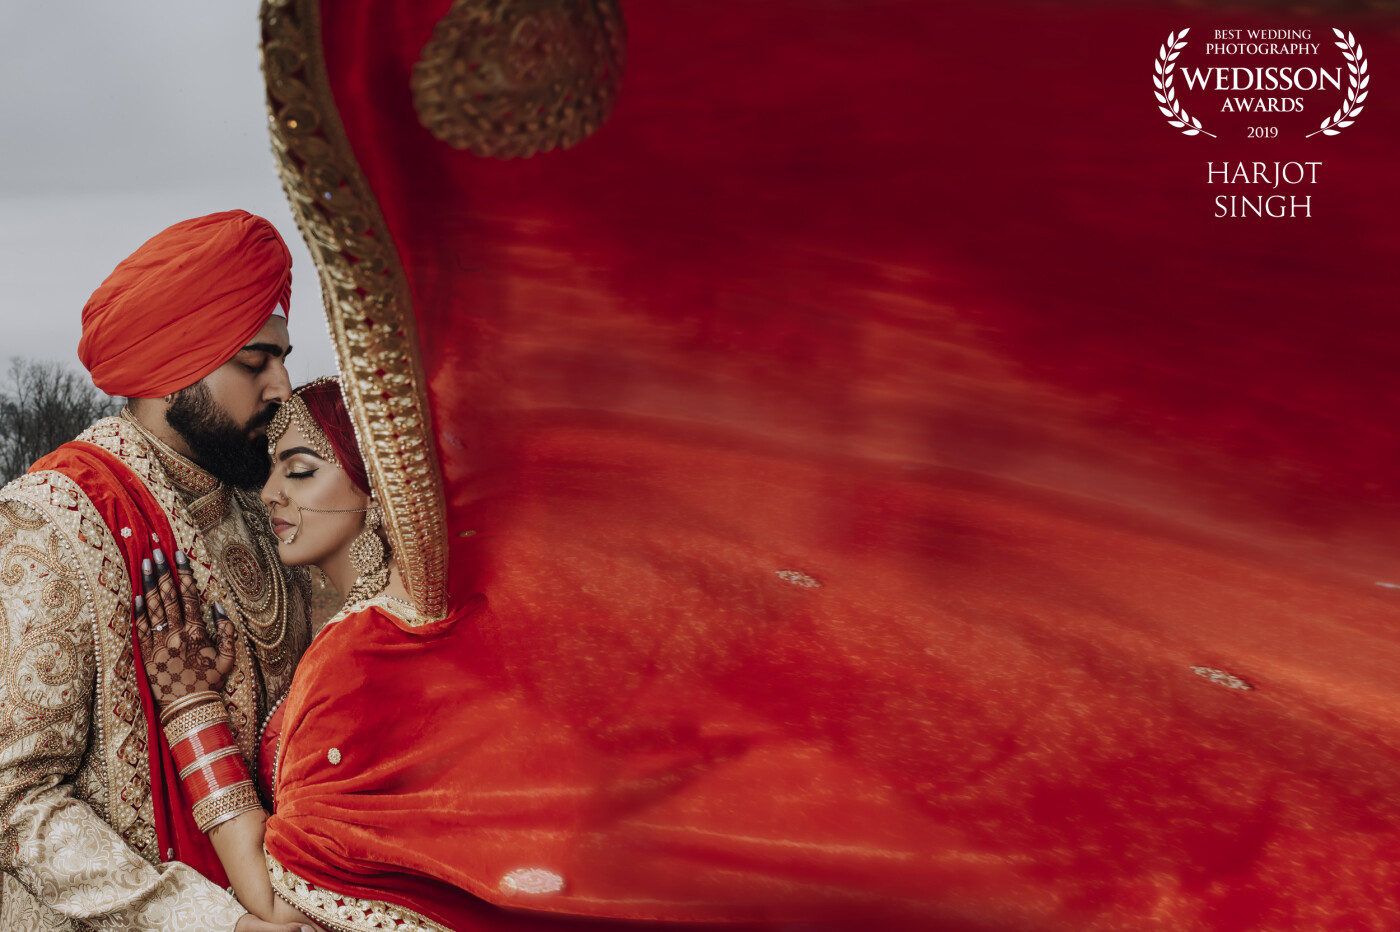 One kiss on the forehead is much sweeter than a thousand kiss on the ... Pallavi & Jaspreet ‪#‎mrandmrsdusanjh2019‬ by Catch Motion Studio - www.CatchMotion.com